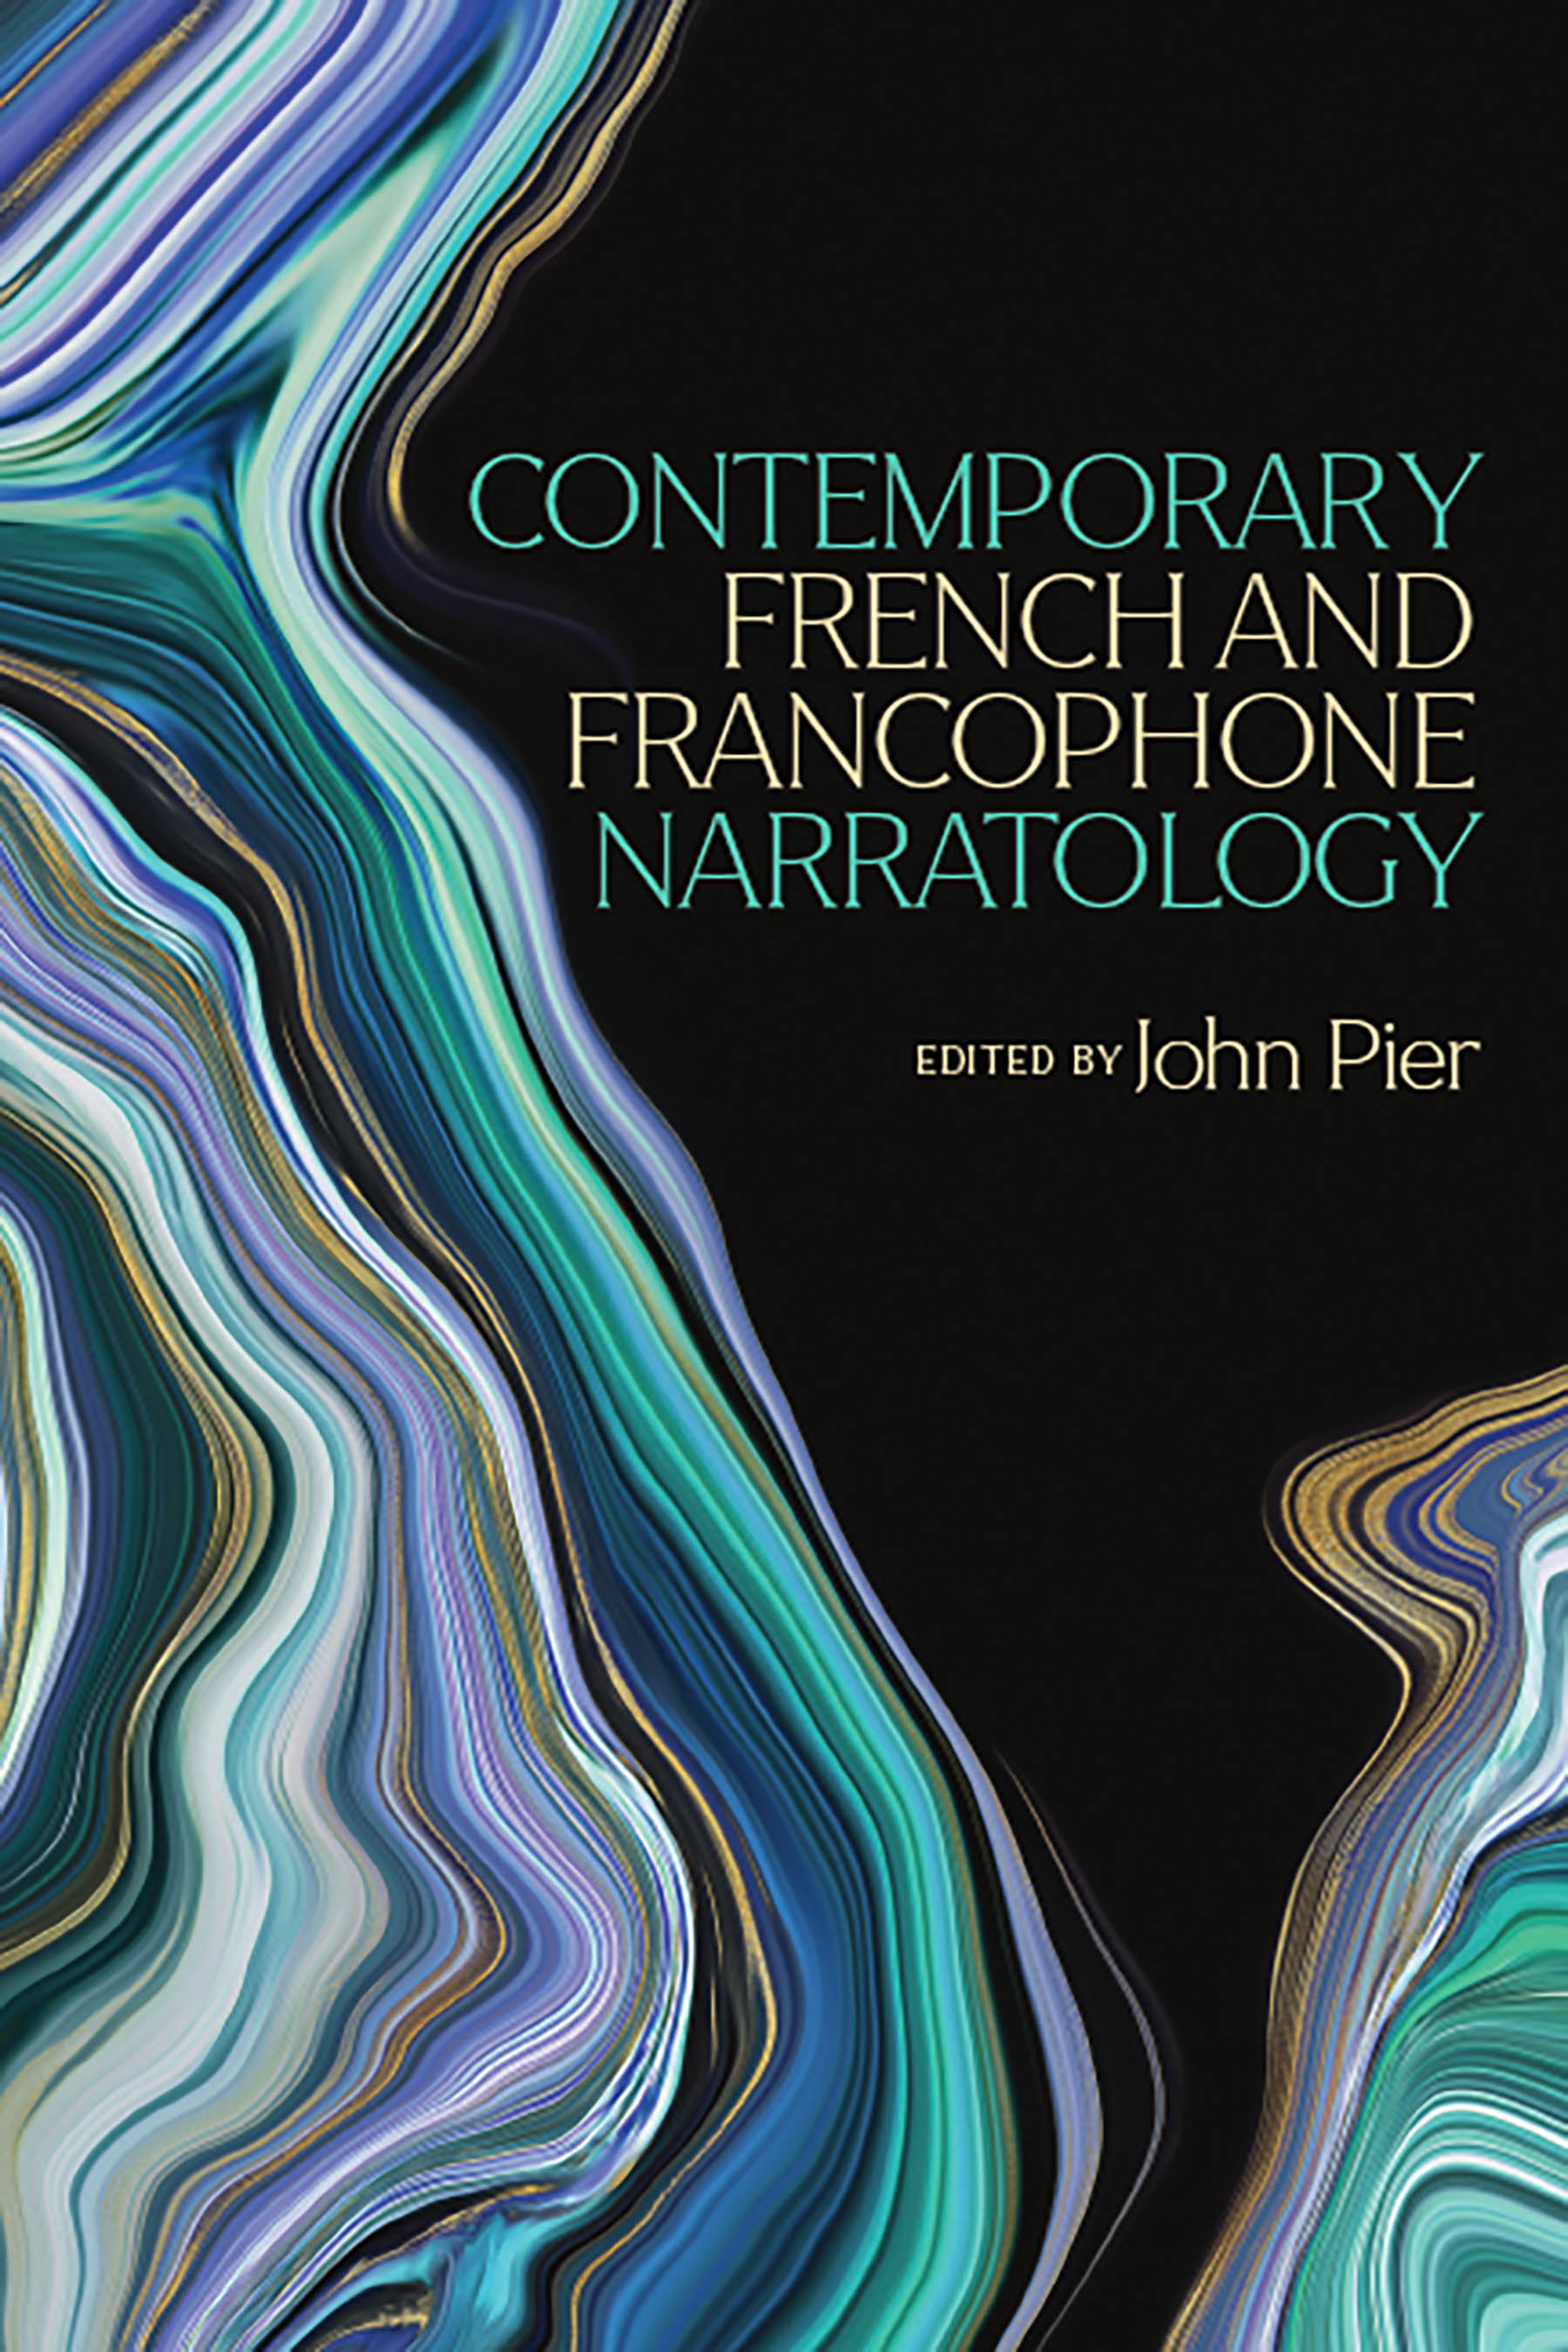 Contemporary French and Francophone Narratology